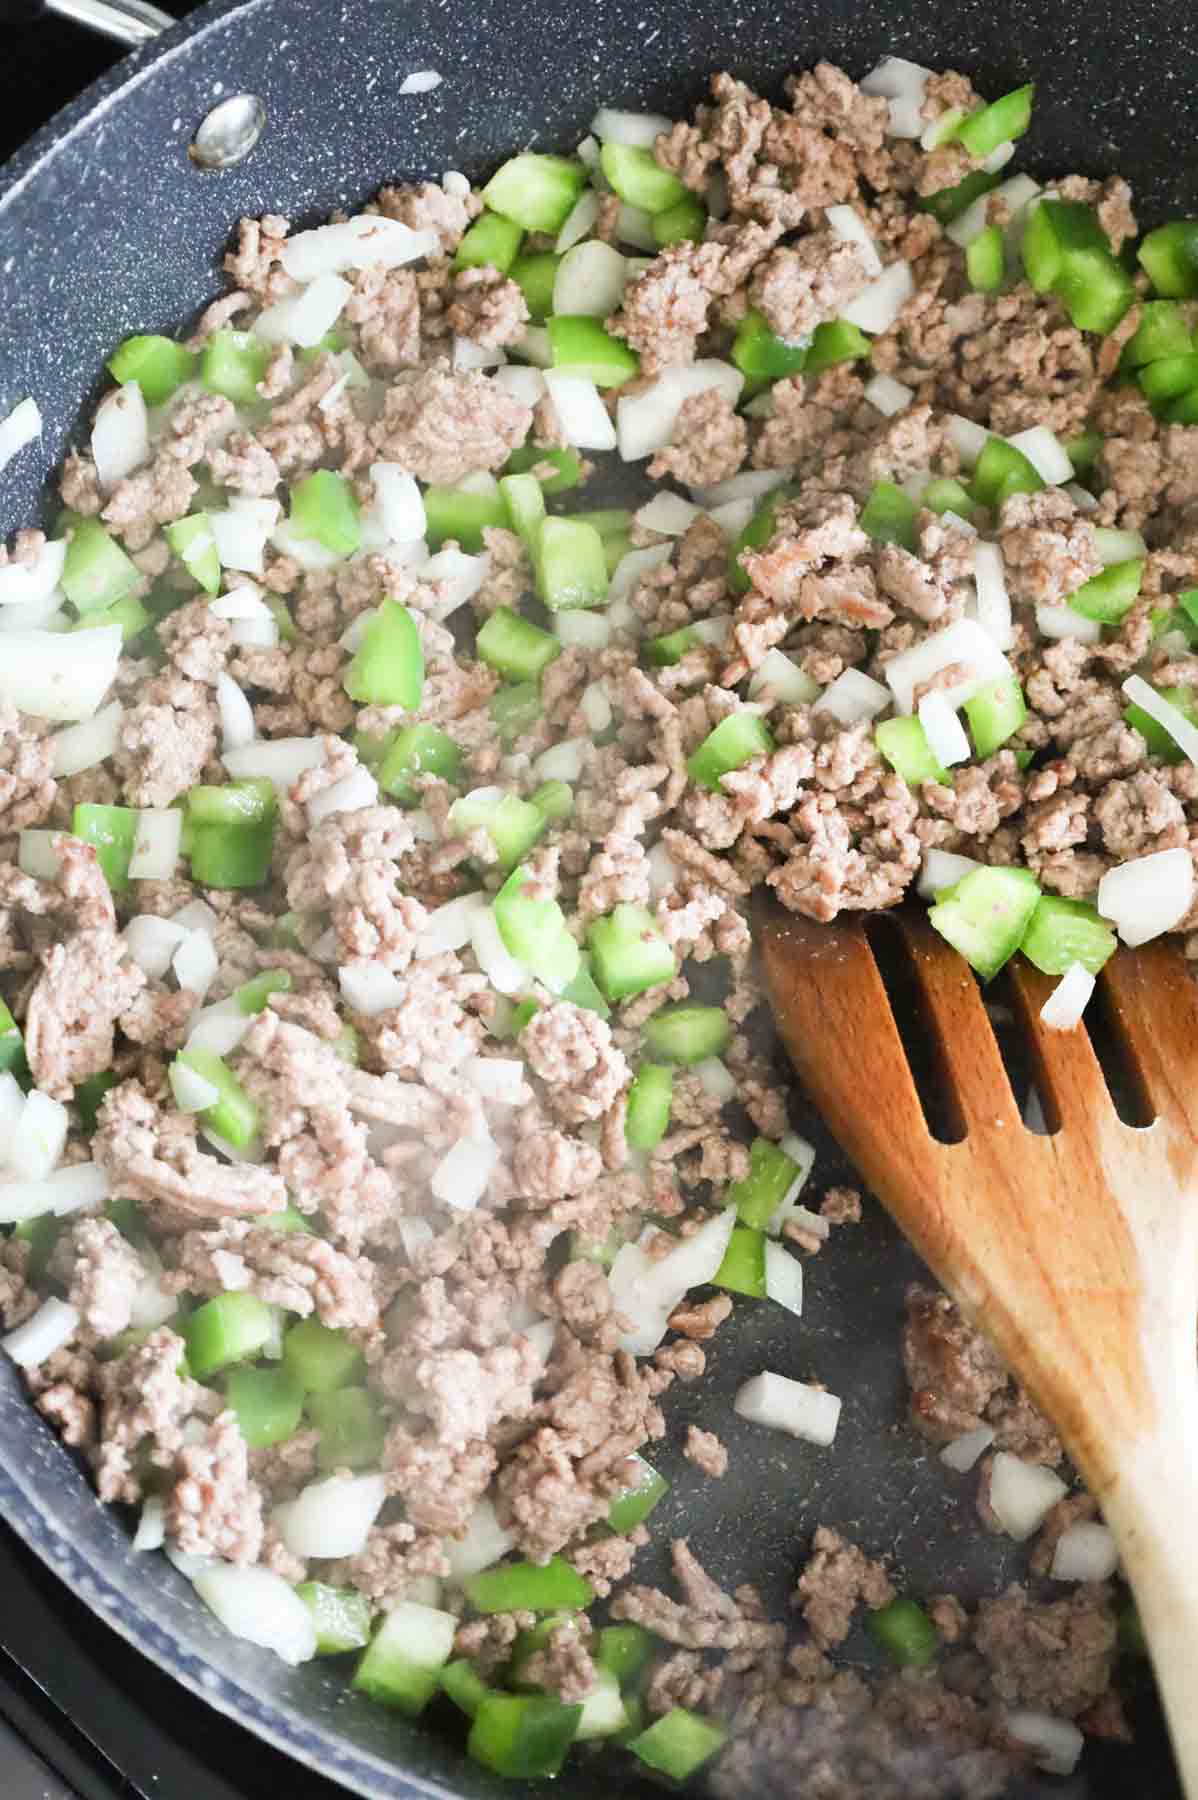 ground beef, diced green peppers and onions cooking in a skillet